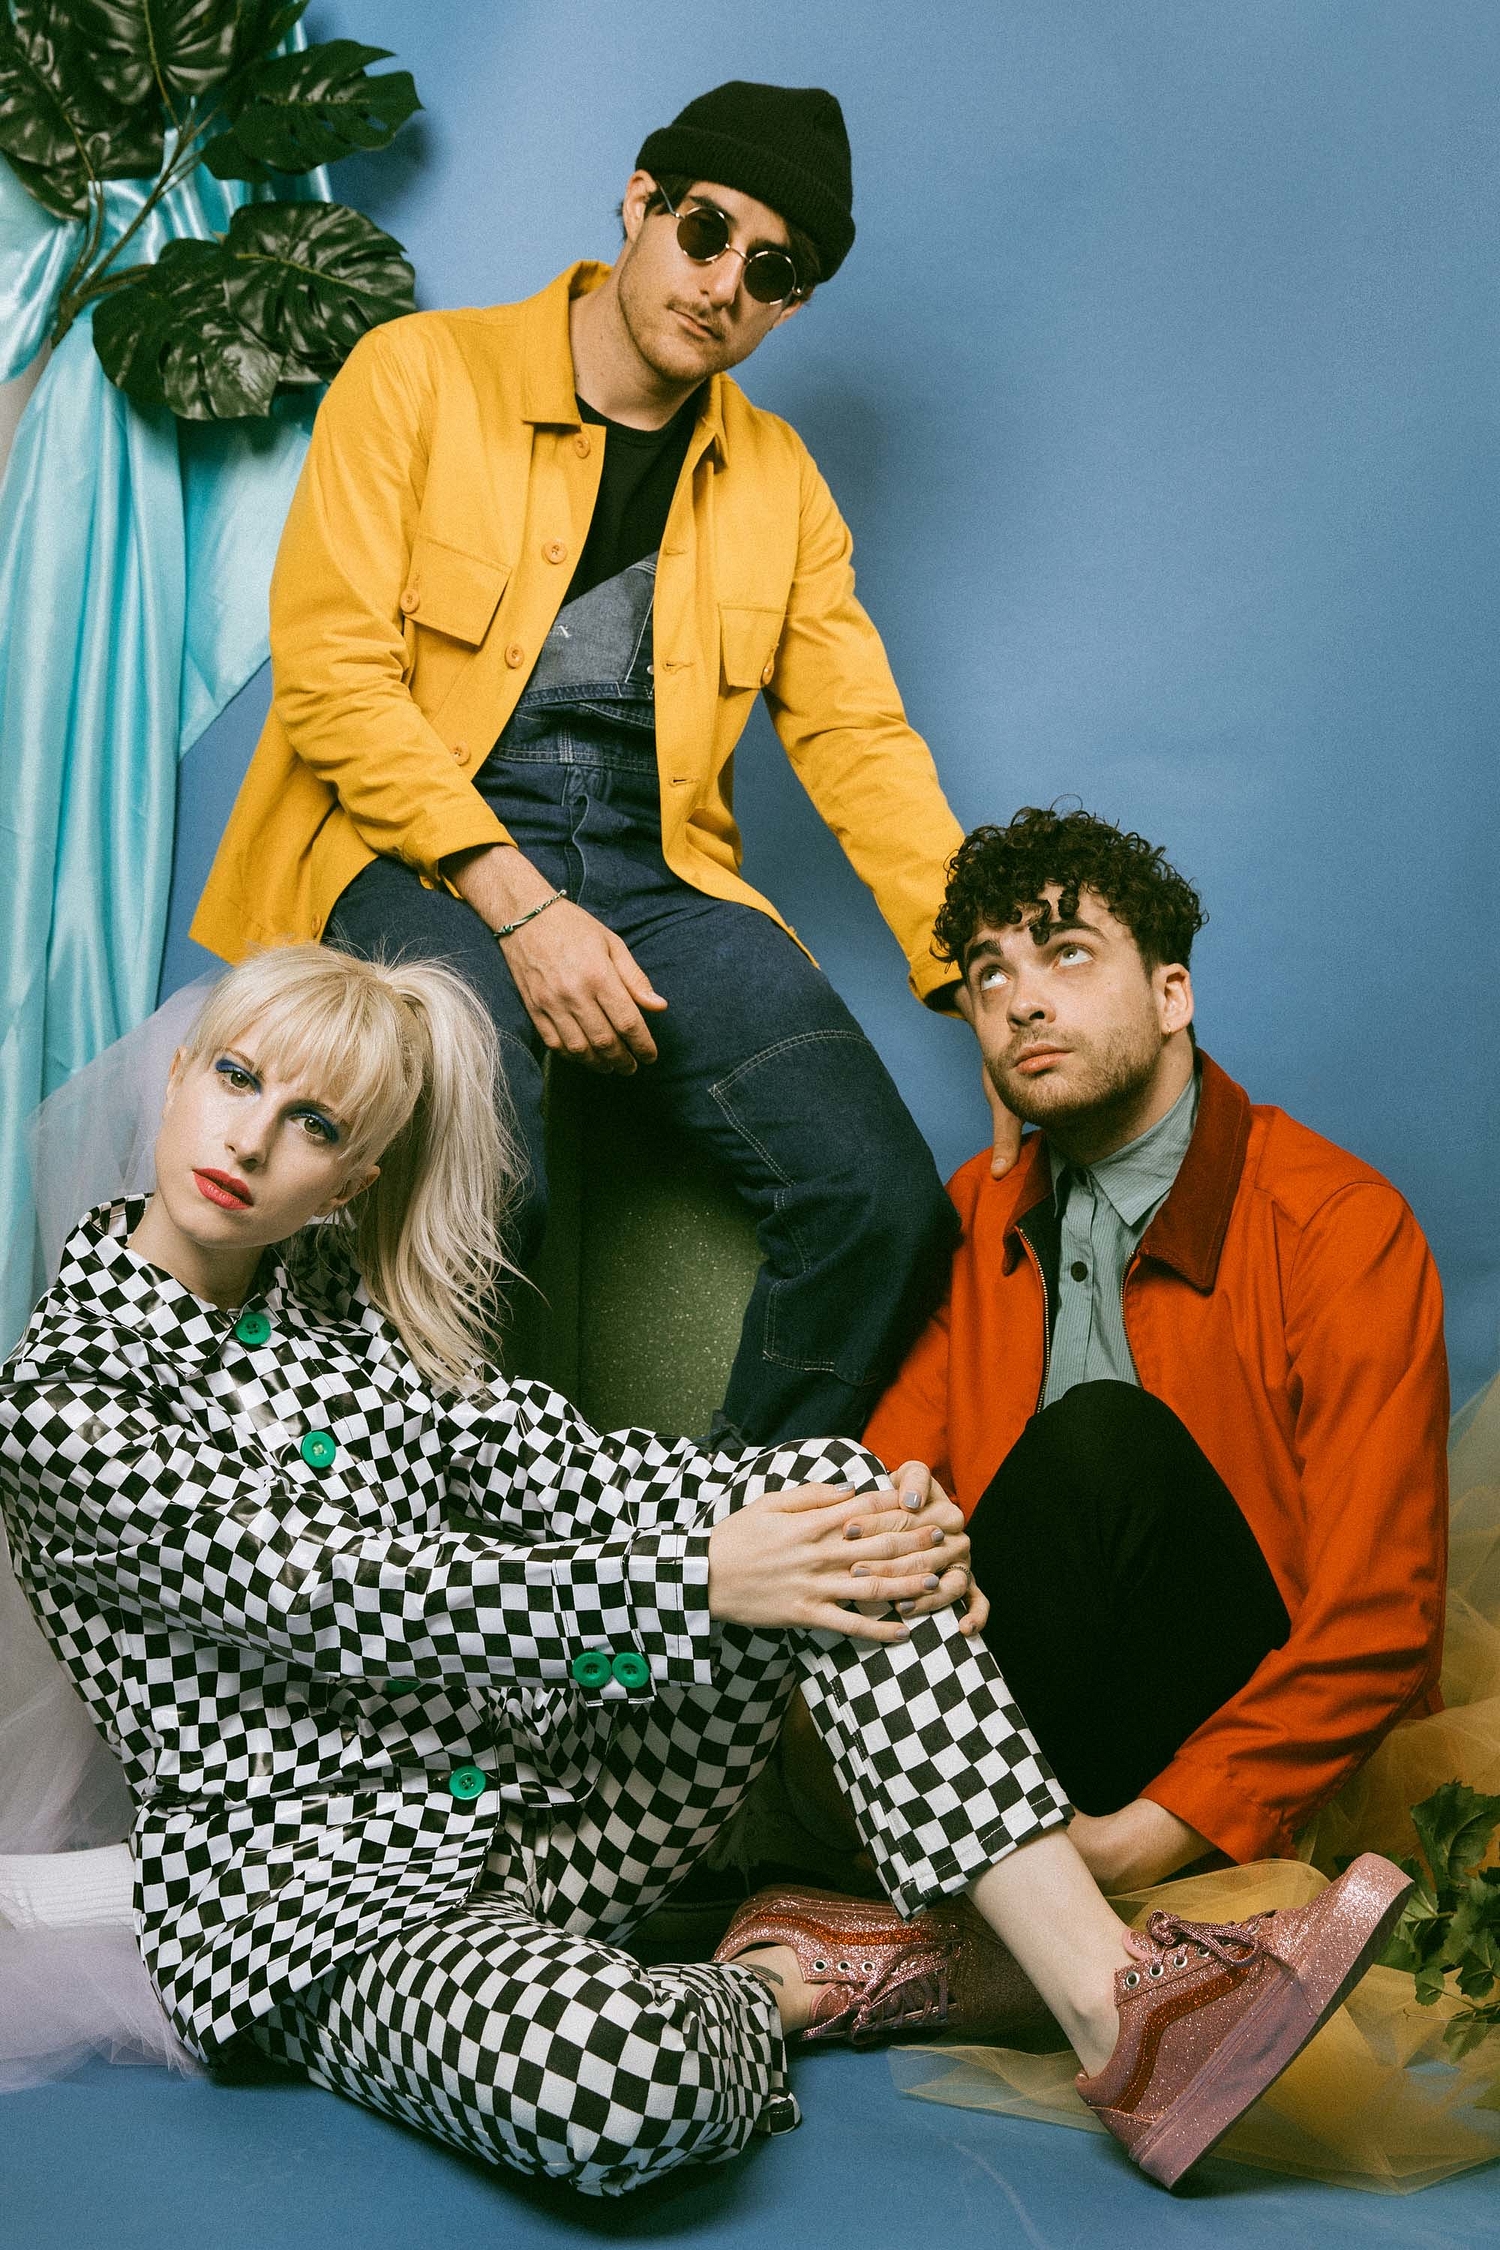 Time for moving on: Paramore • Cover Feature • DIY Magazine